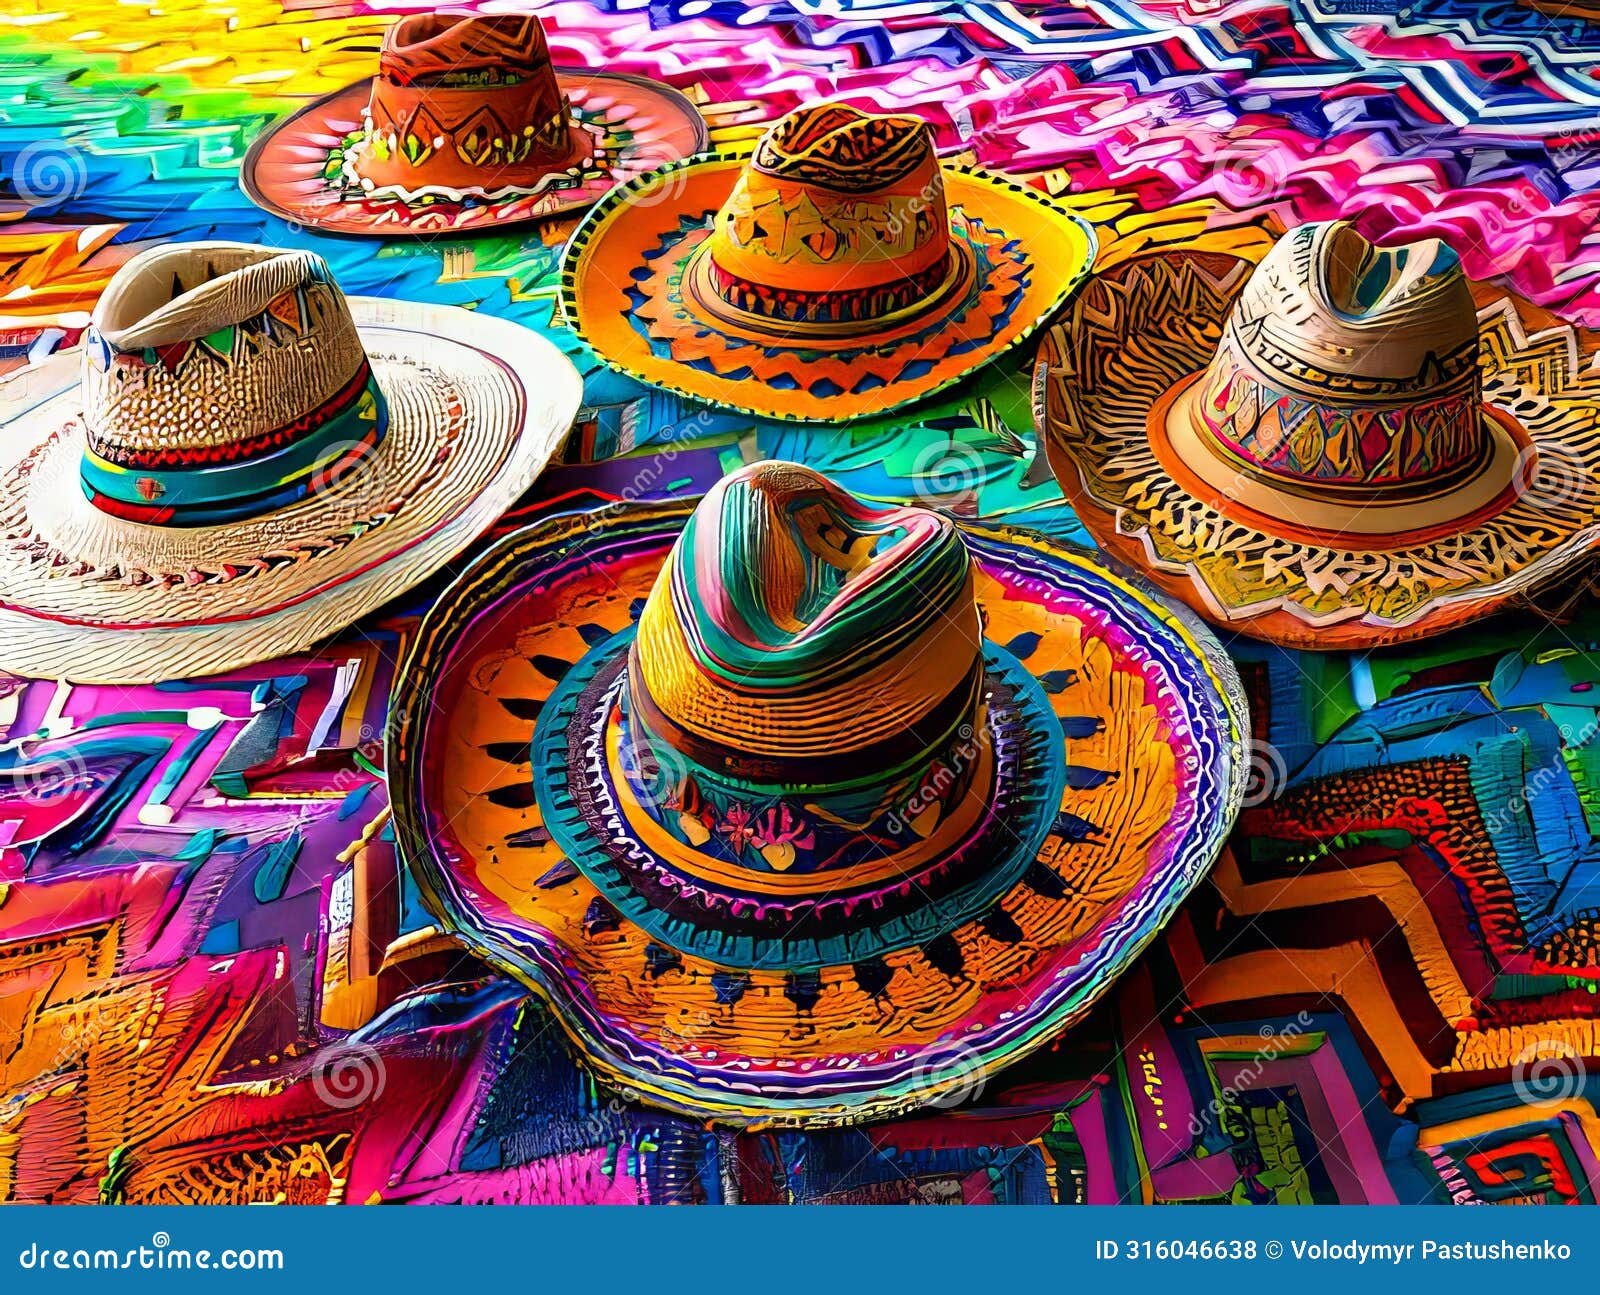 colorful hats on a colorful blanket